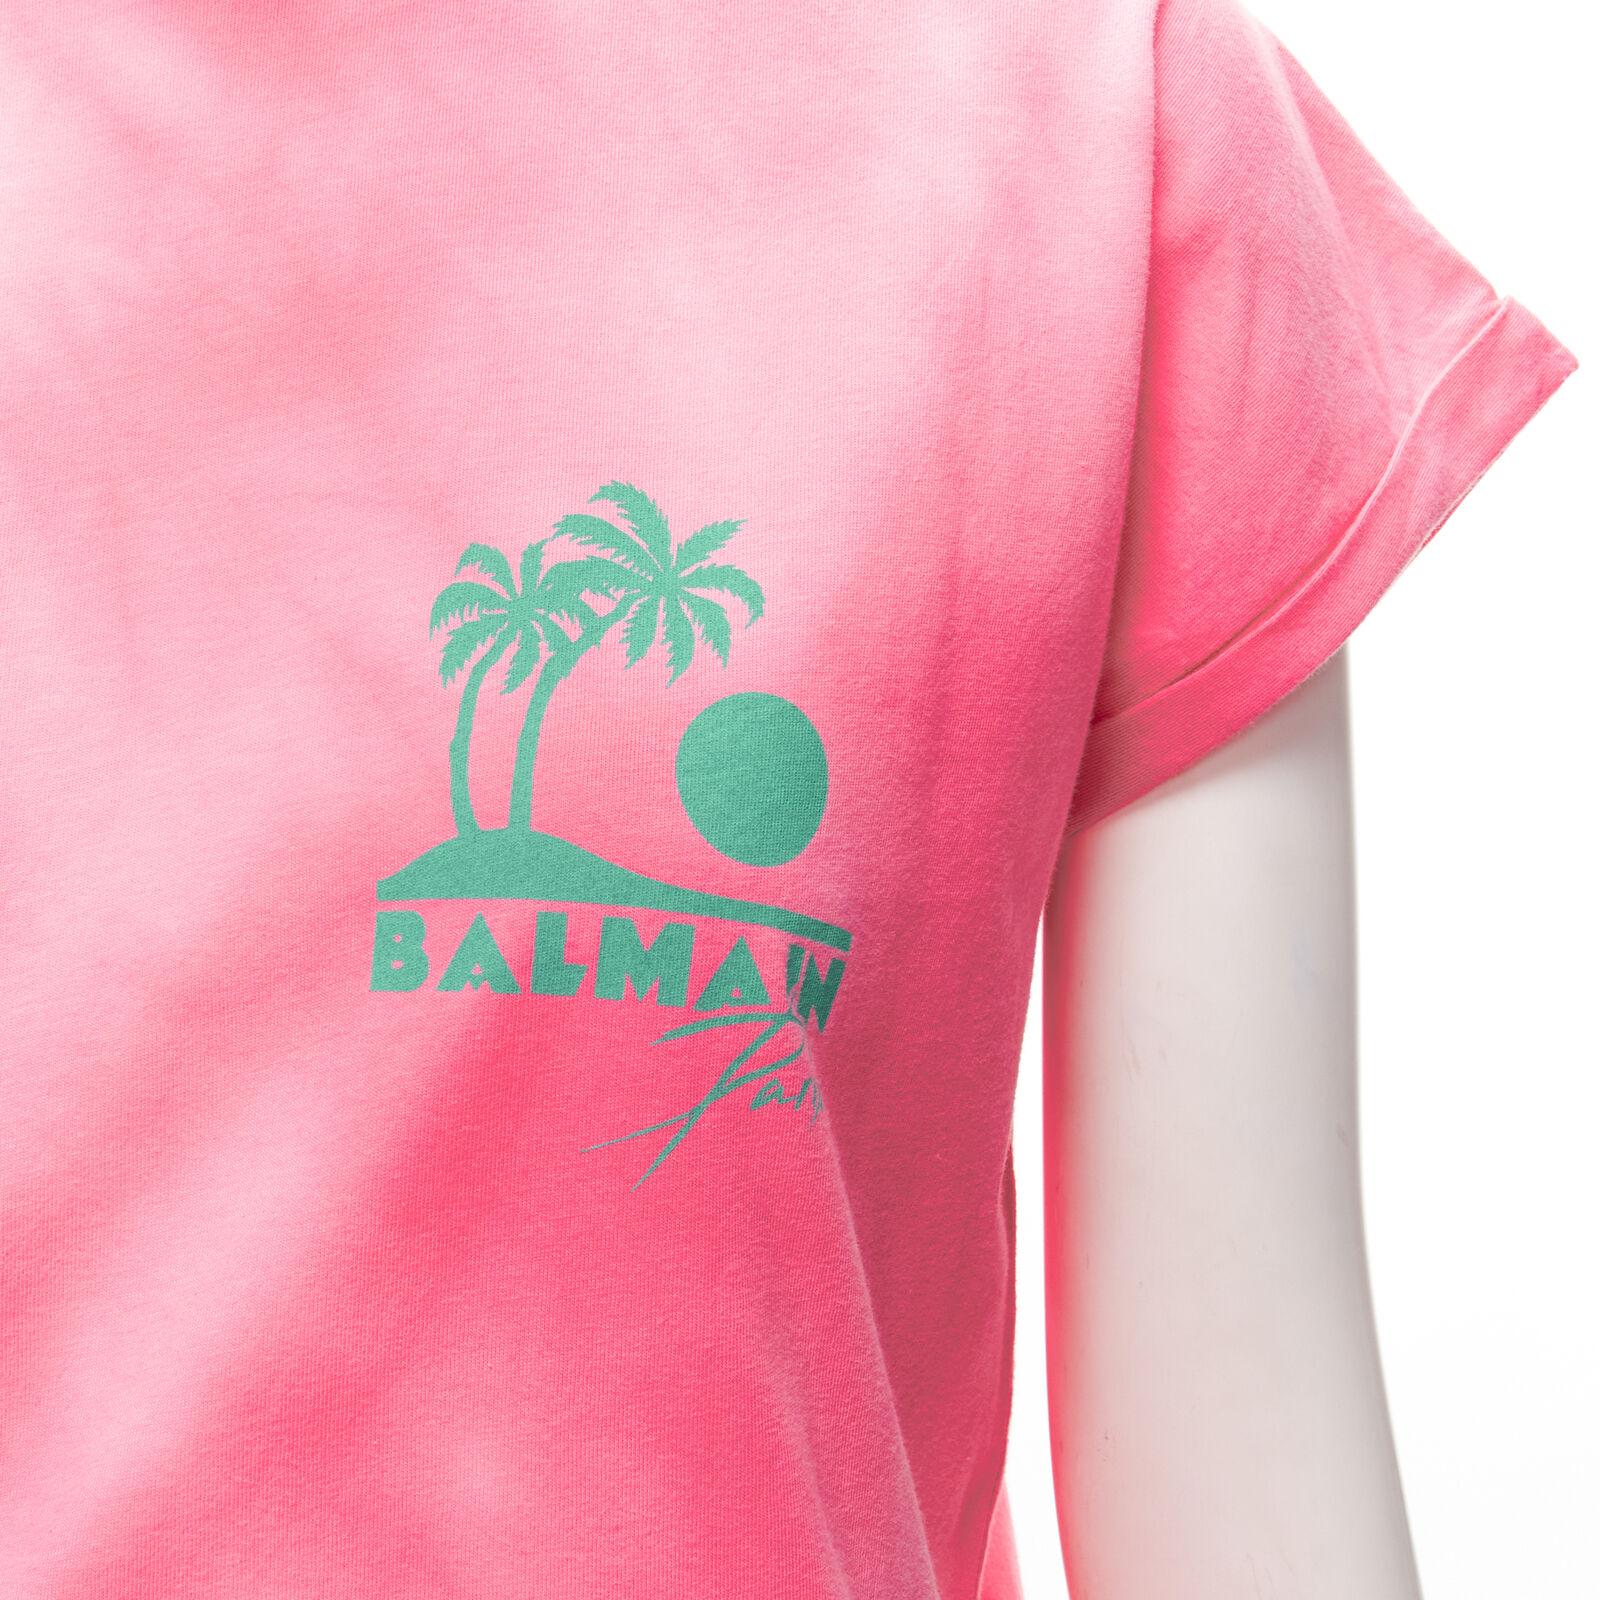 BALMAIN green palm tree logo pink tie dye crew neck cap sleeves tshirt top XXS
Reference: AAWC/A00212
Brand: Balmain
Designer: Olivier Rousteing
Material: Feels like cotton
Color: Pink
Pattern: Tie Dye
Closure: Pullover
Made in: